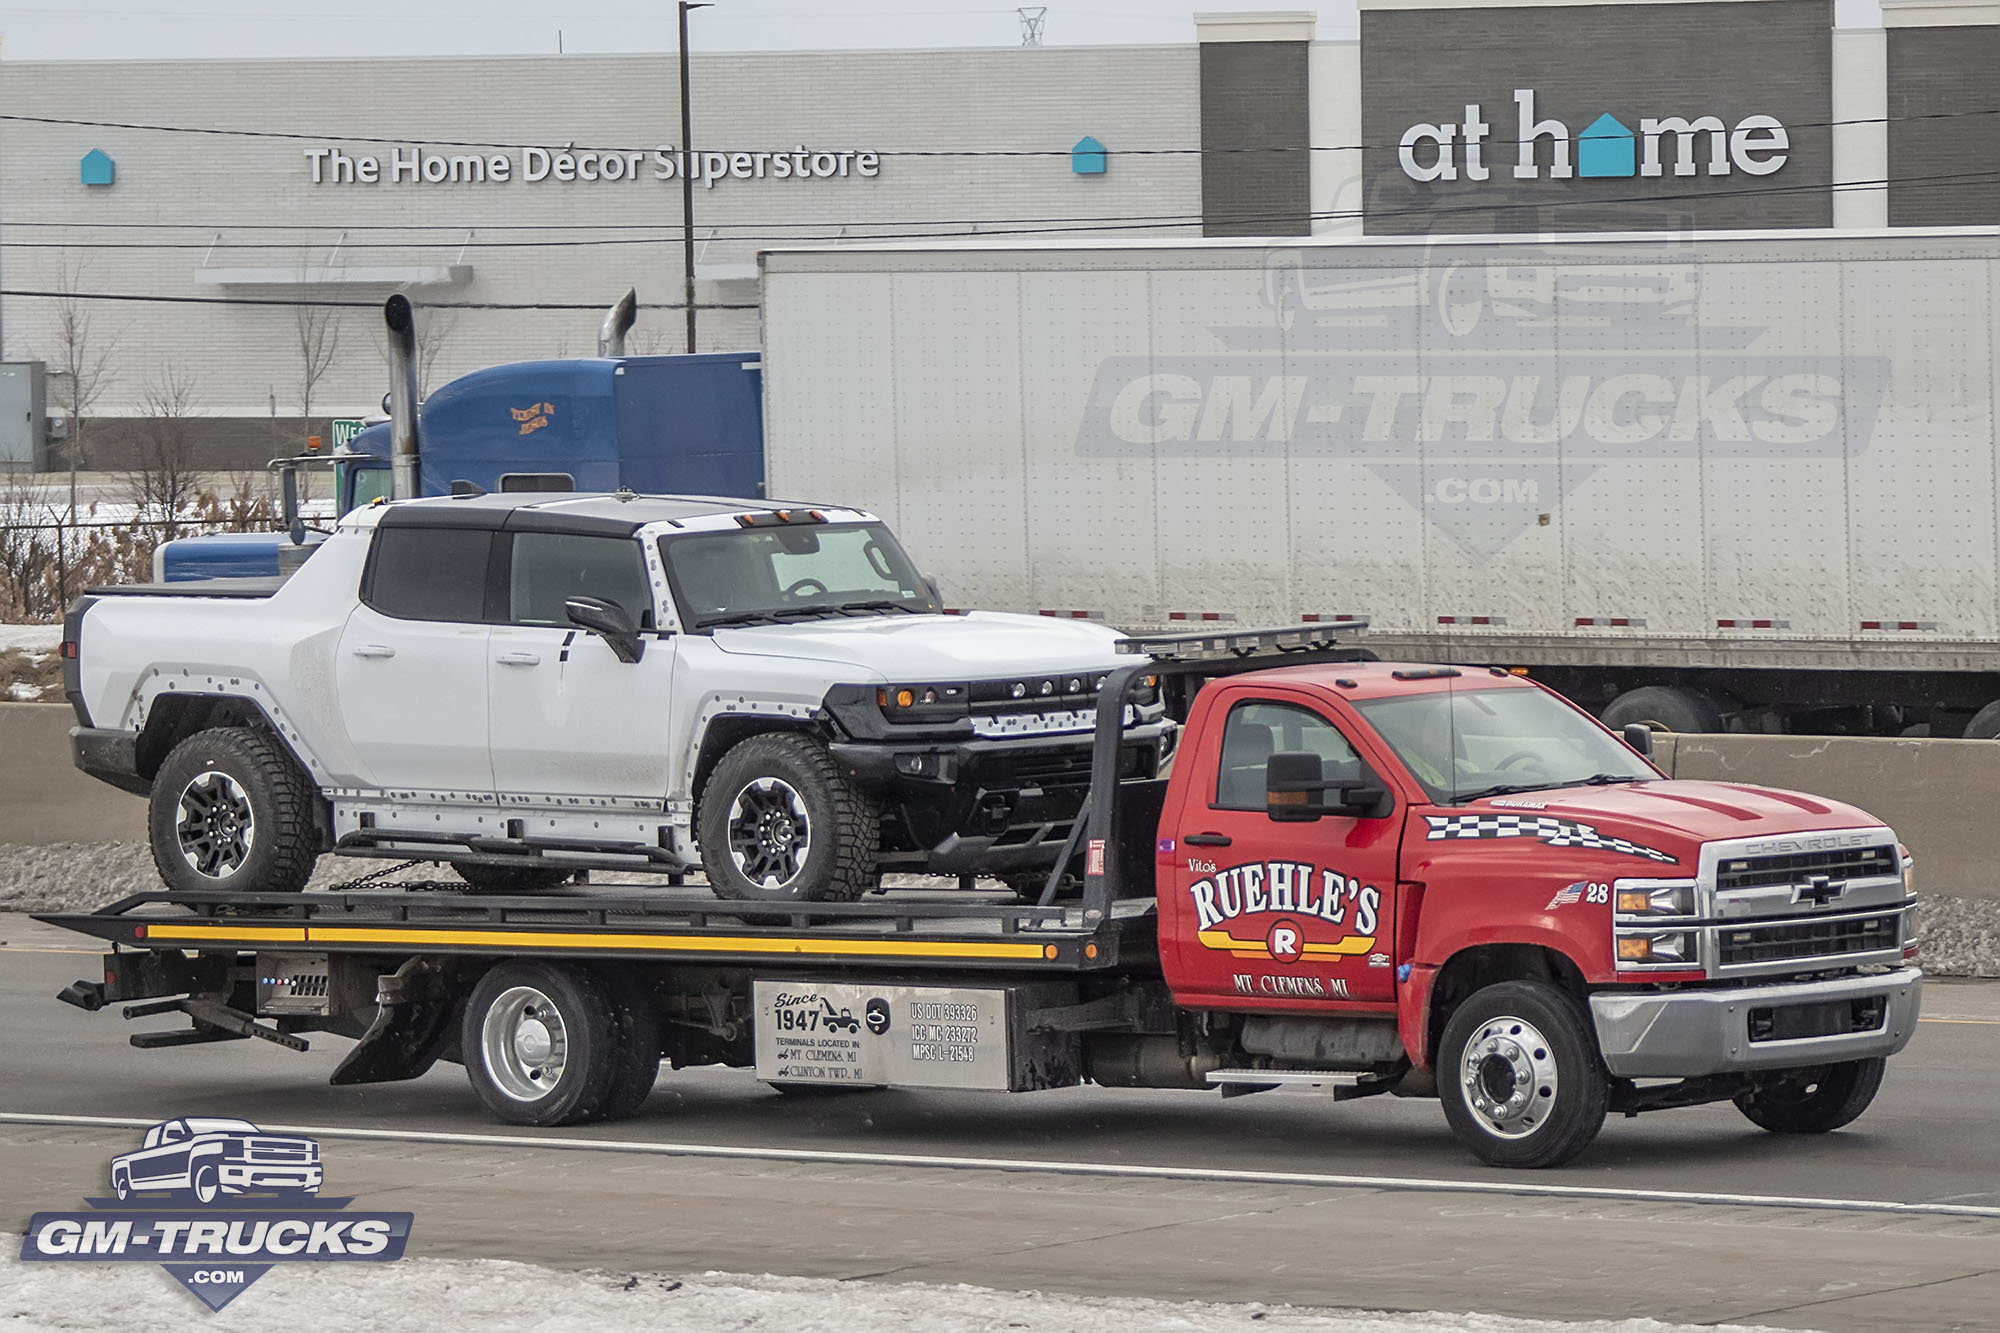 [Spy Shots] GMC HUMMER EV Caught Testing For The First Time